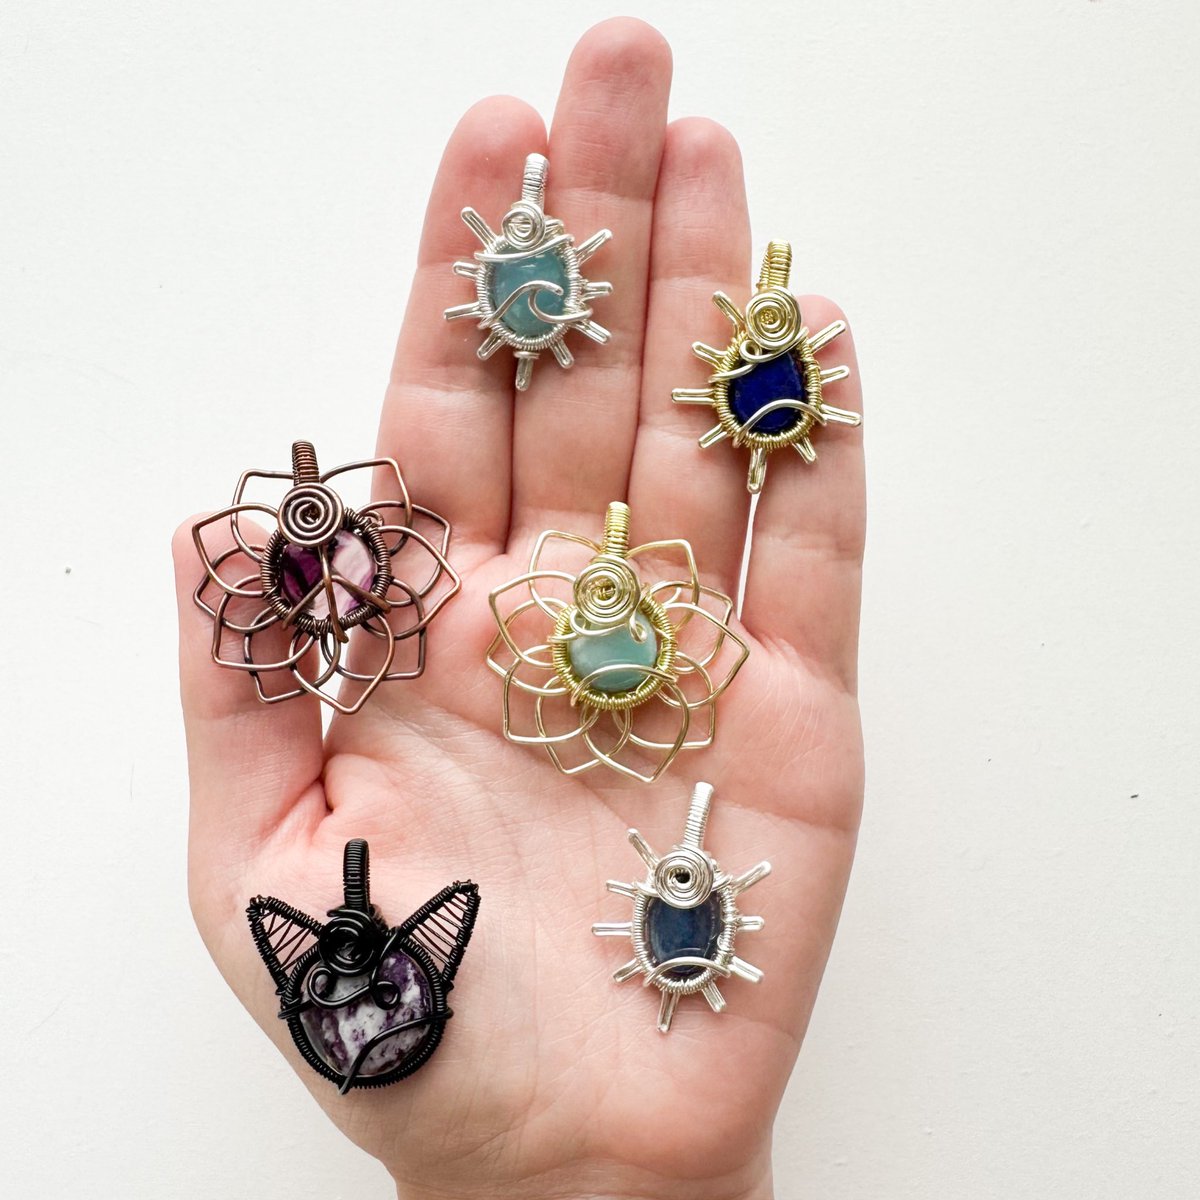 handful of baby crystal pendants 💜💧

available June 16th at 8pm eastern time